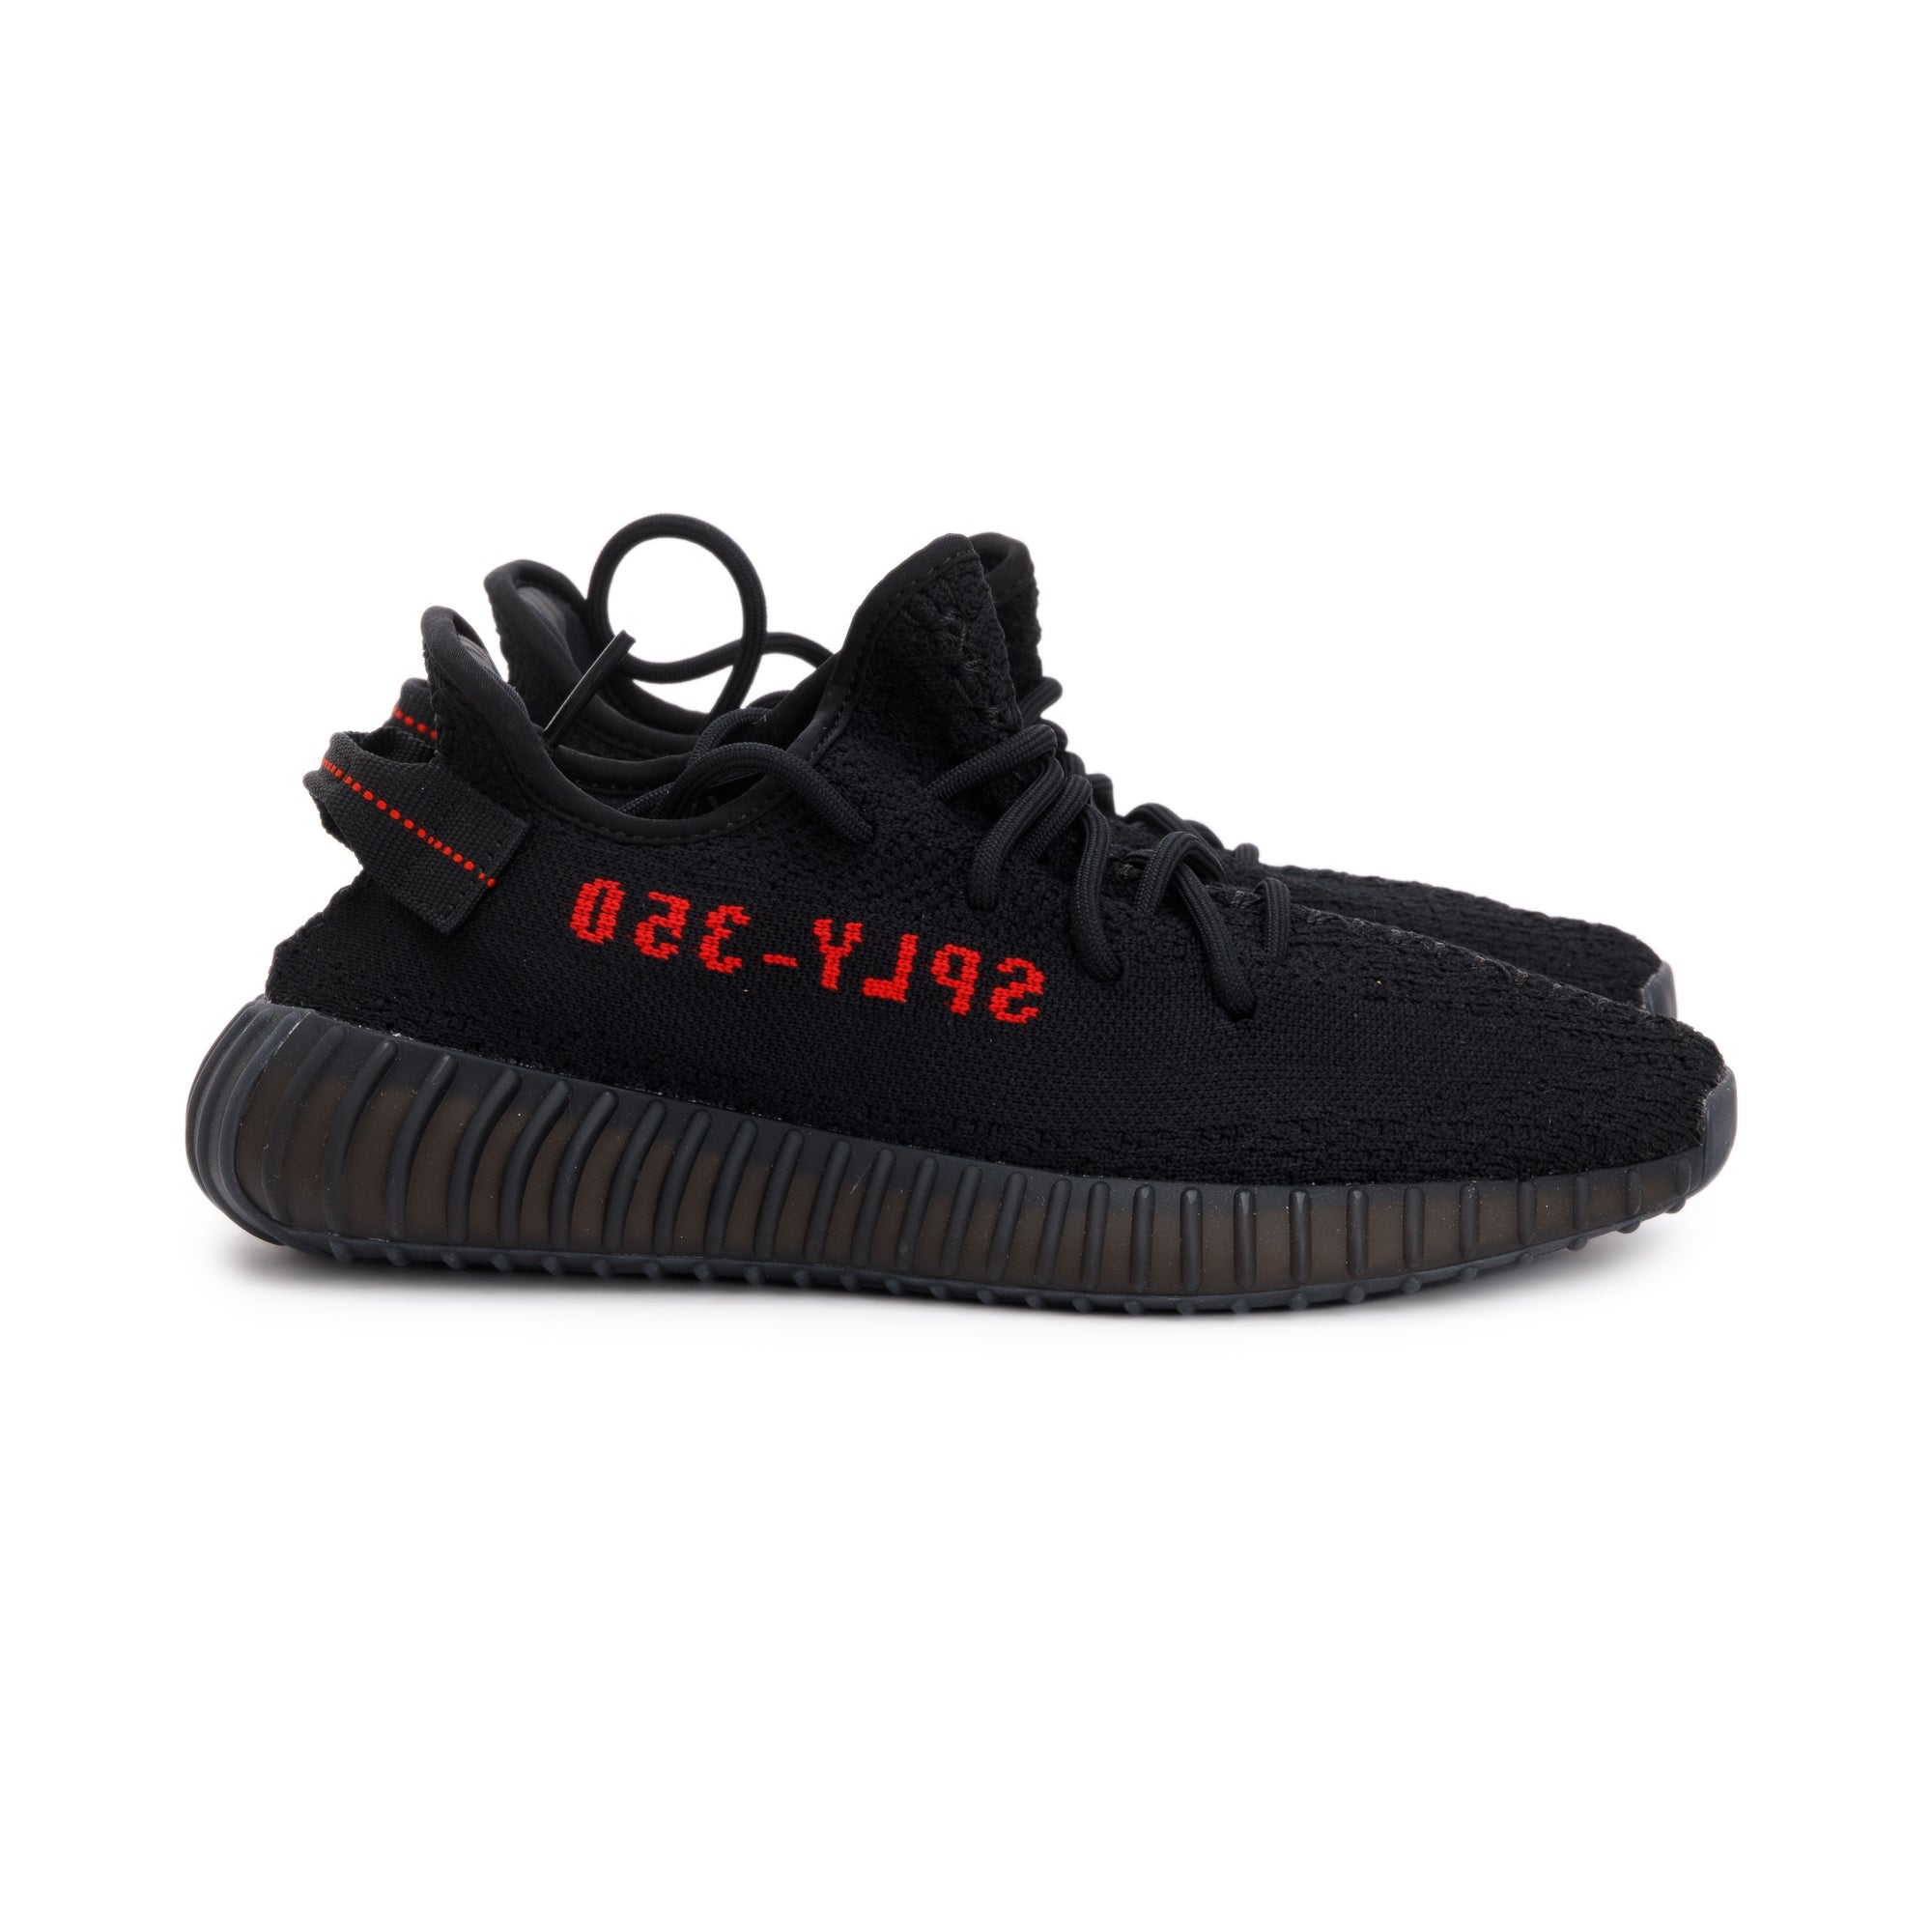 Adidas Yeezy Boost 350 V2 Black Sneakers, Size 6.5 w/ Box – Oliver ...